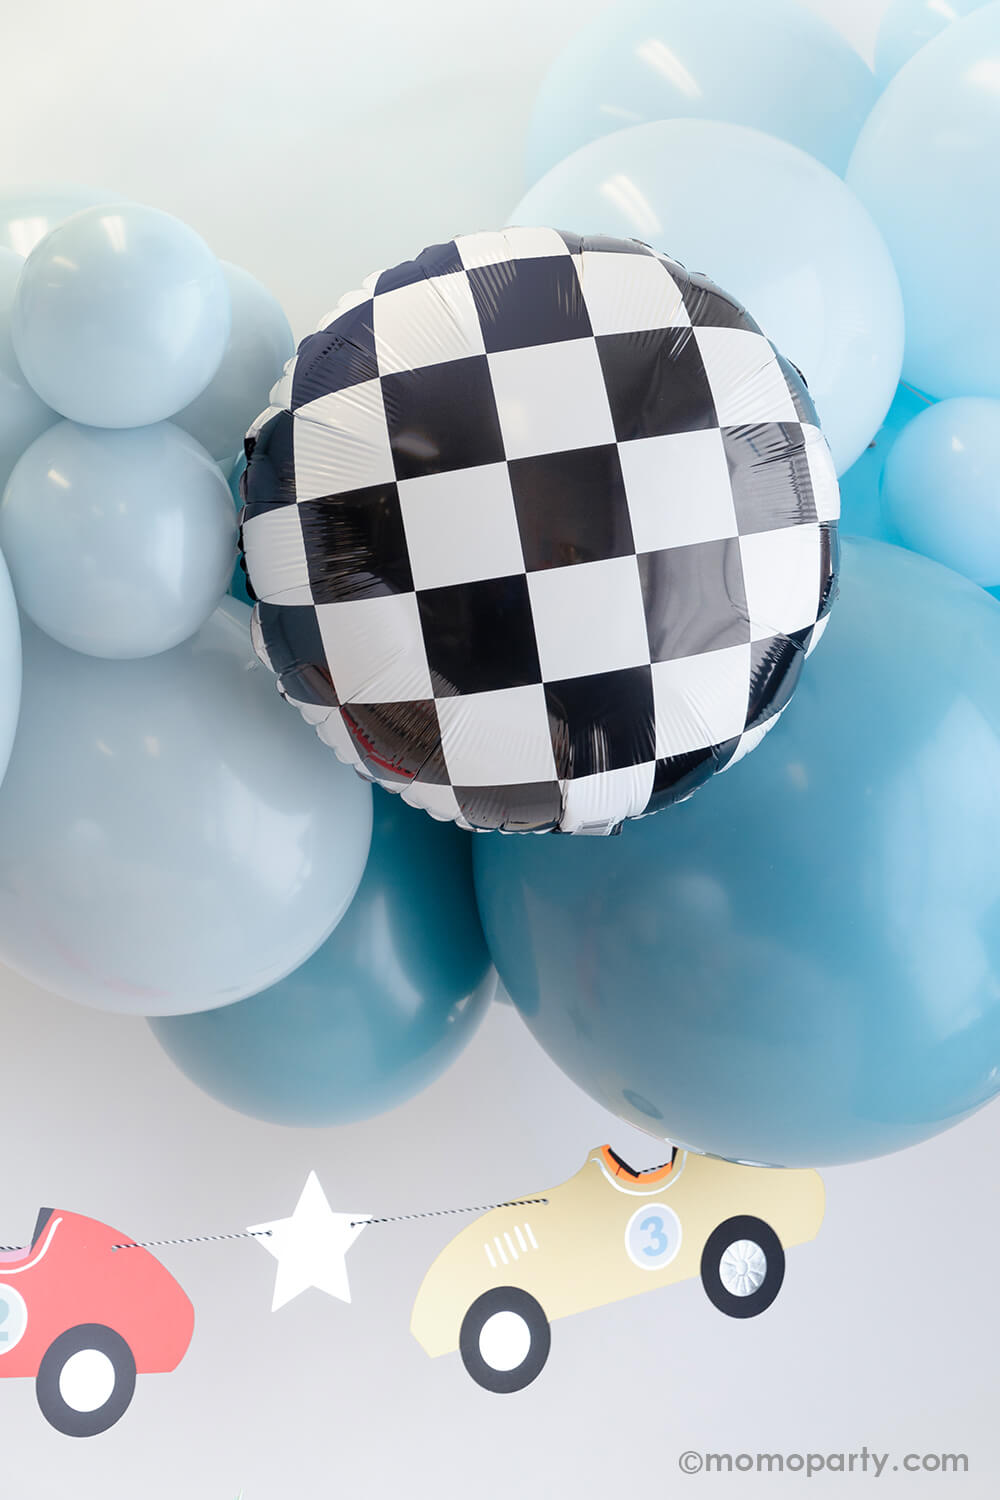 A modern race car themed party decoration by Momo Party featuring a blue balloon garland adorned with checkered foil balloons, underneath hung a vintage race car party garland in pastel colors by Meri Meri. Makes this a perfect party decoration for kid's "Two Fast" second birthday party or a "Fast One" first birthday party.